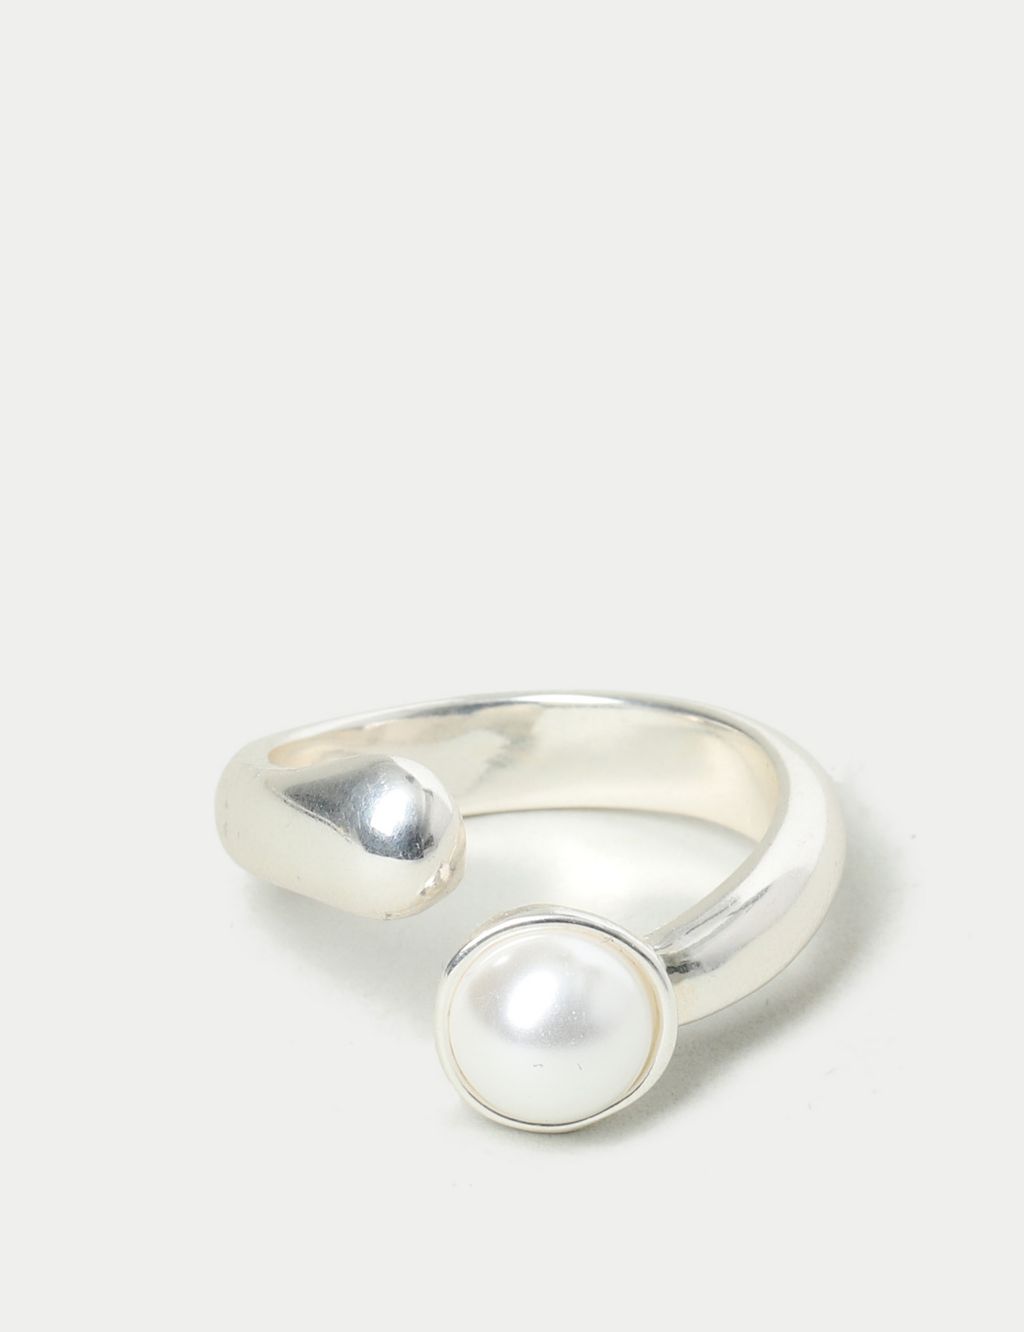 Silver Pearl Wrap Ring image 2